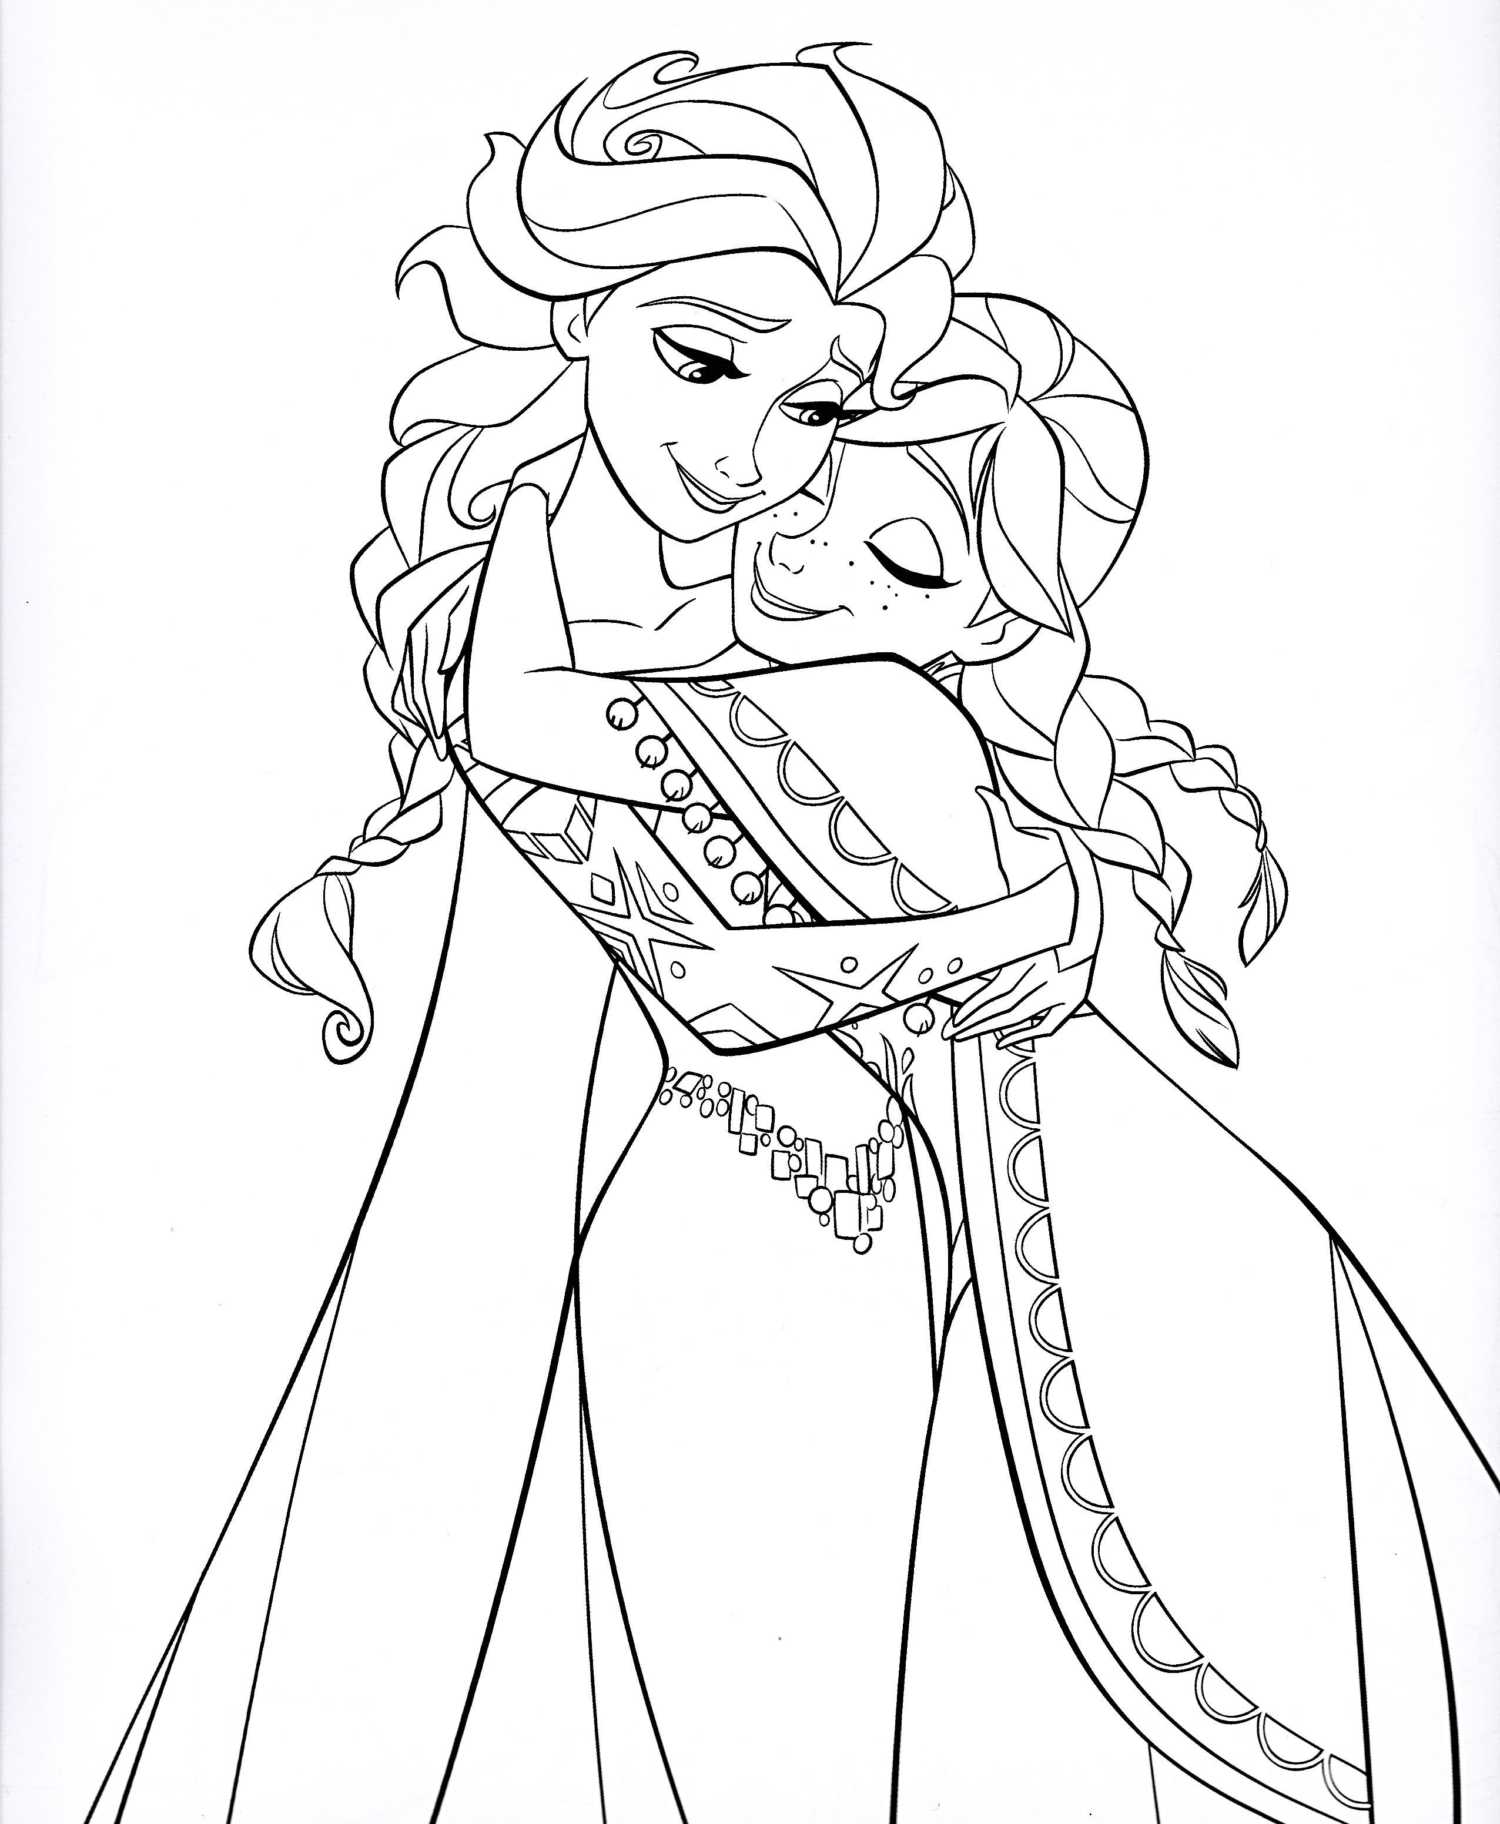 12 Most Fabulous Frozen Coloring Pages Anna And Elsa Olaf To ...